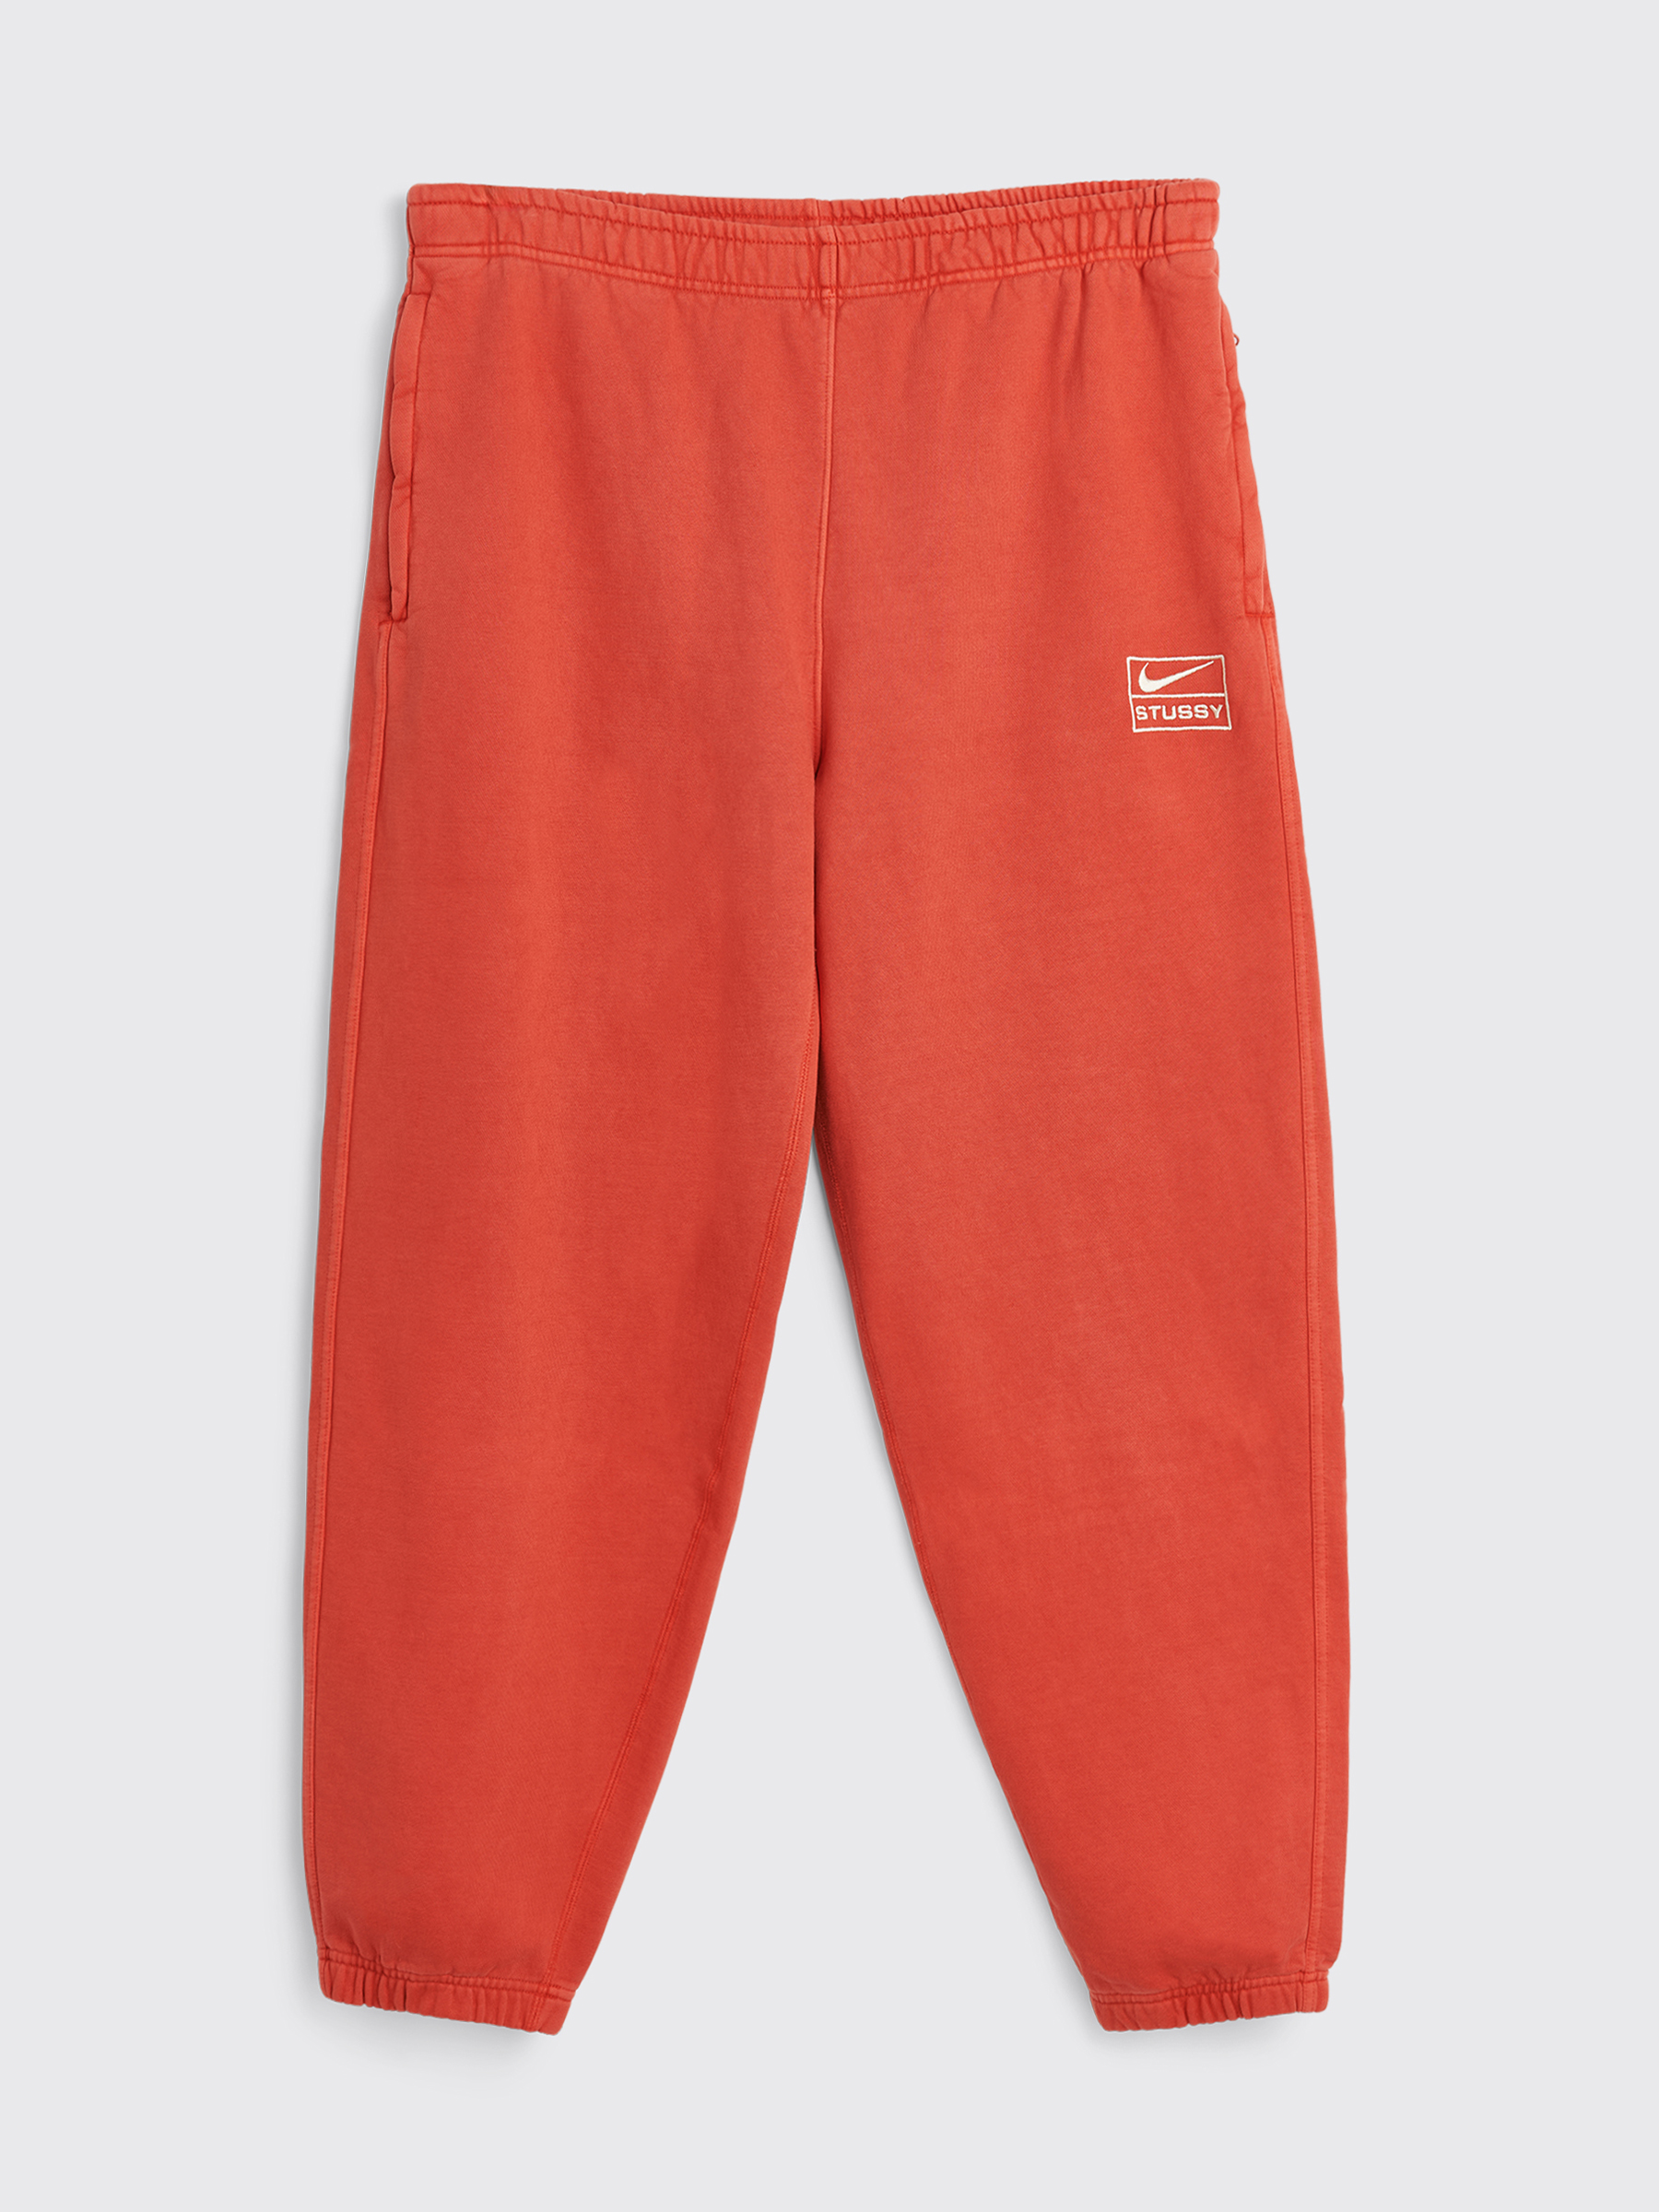 Nike x Stüssy Pigment Dyed Fleece Pants Habanero Red / Natural